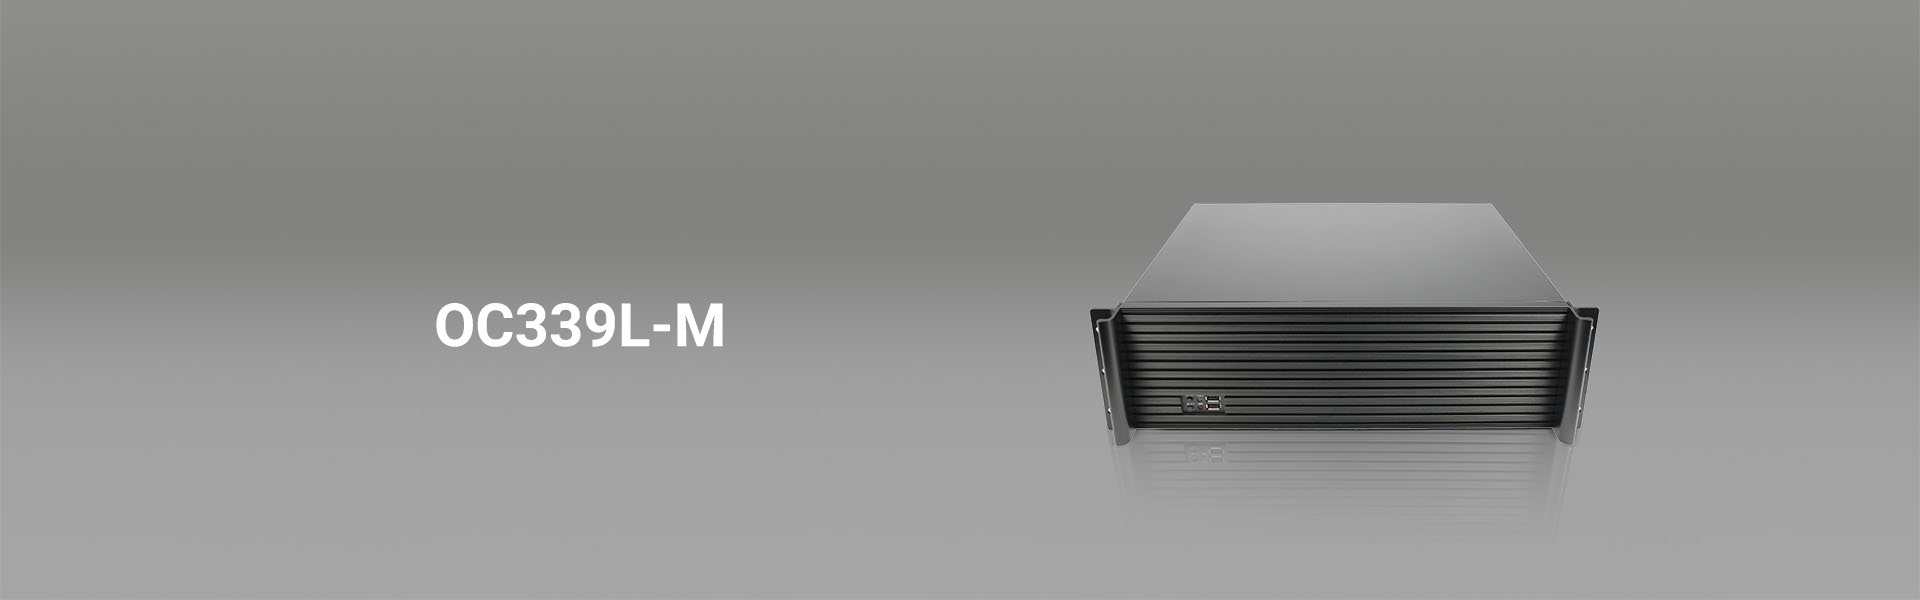 rackmount chassis-oc339l-M-onechassis-banner